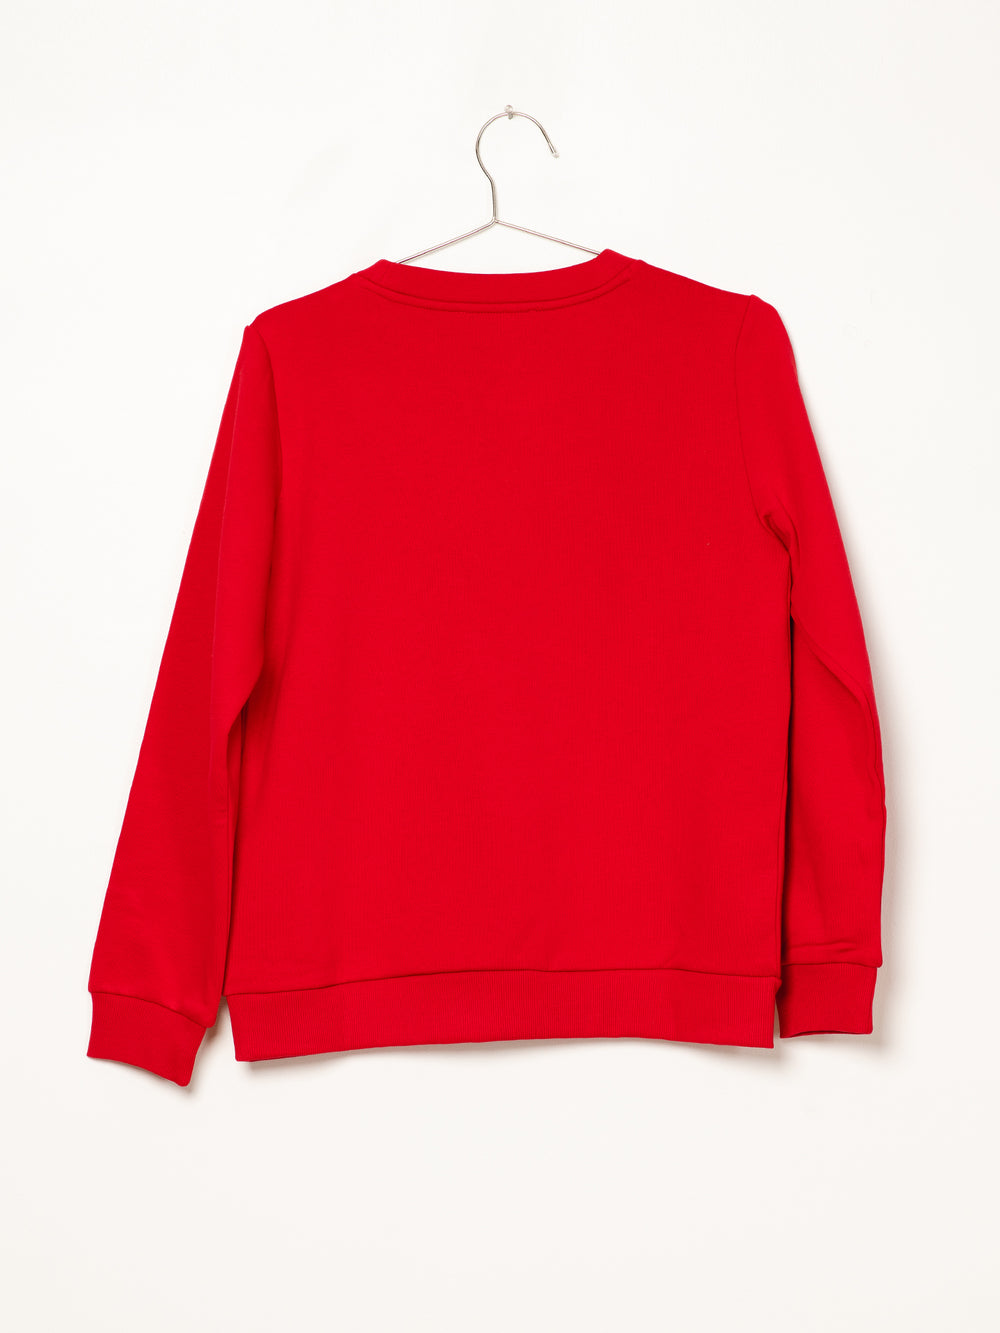 WOMENS VINTAGE CREW - DARK RED - CLEARANCE